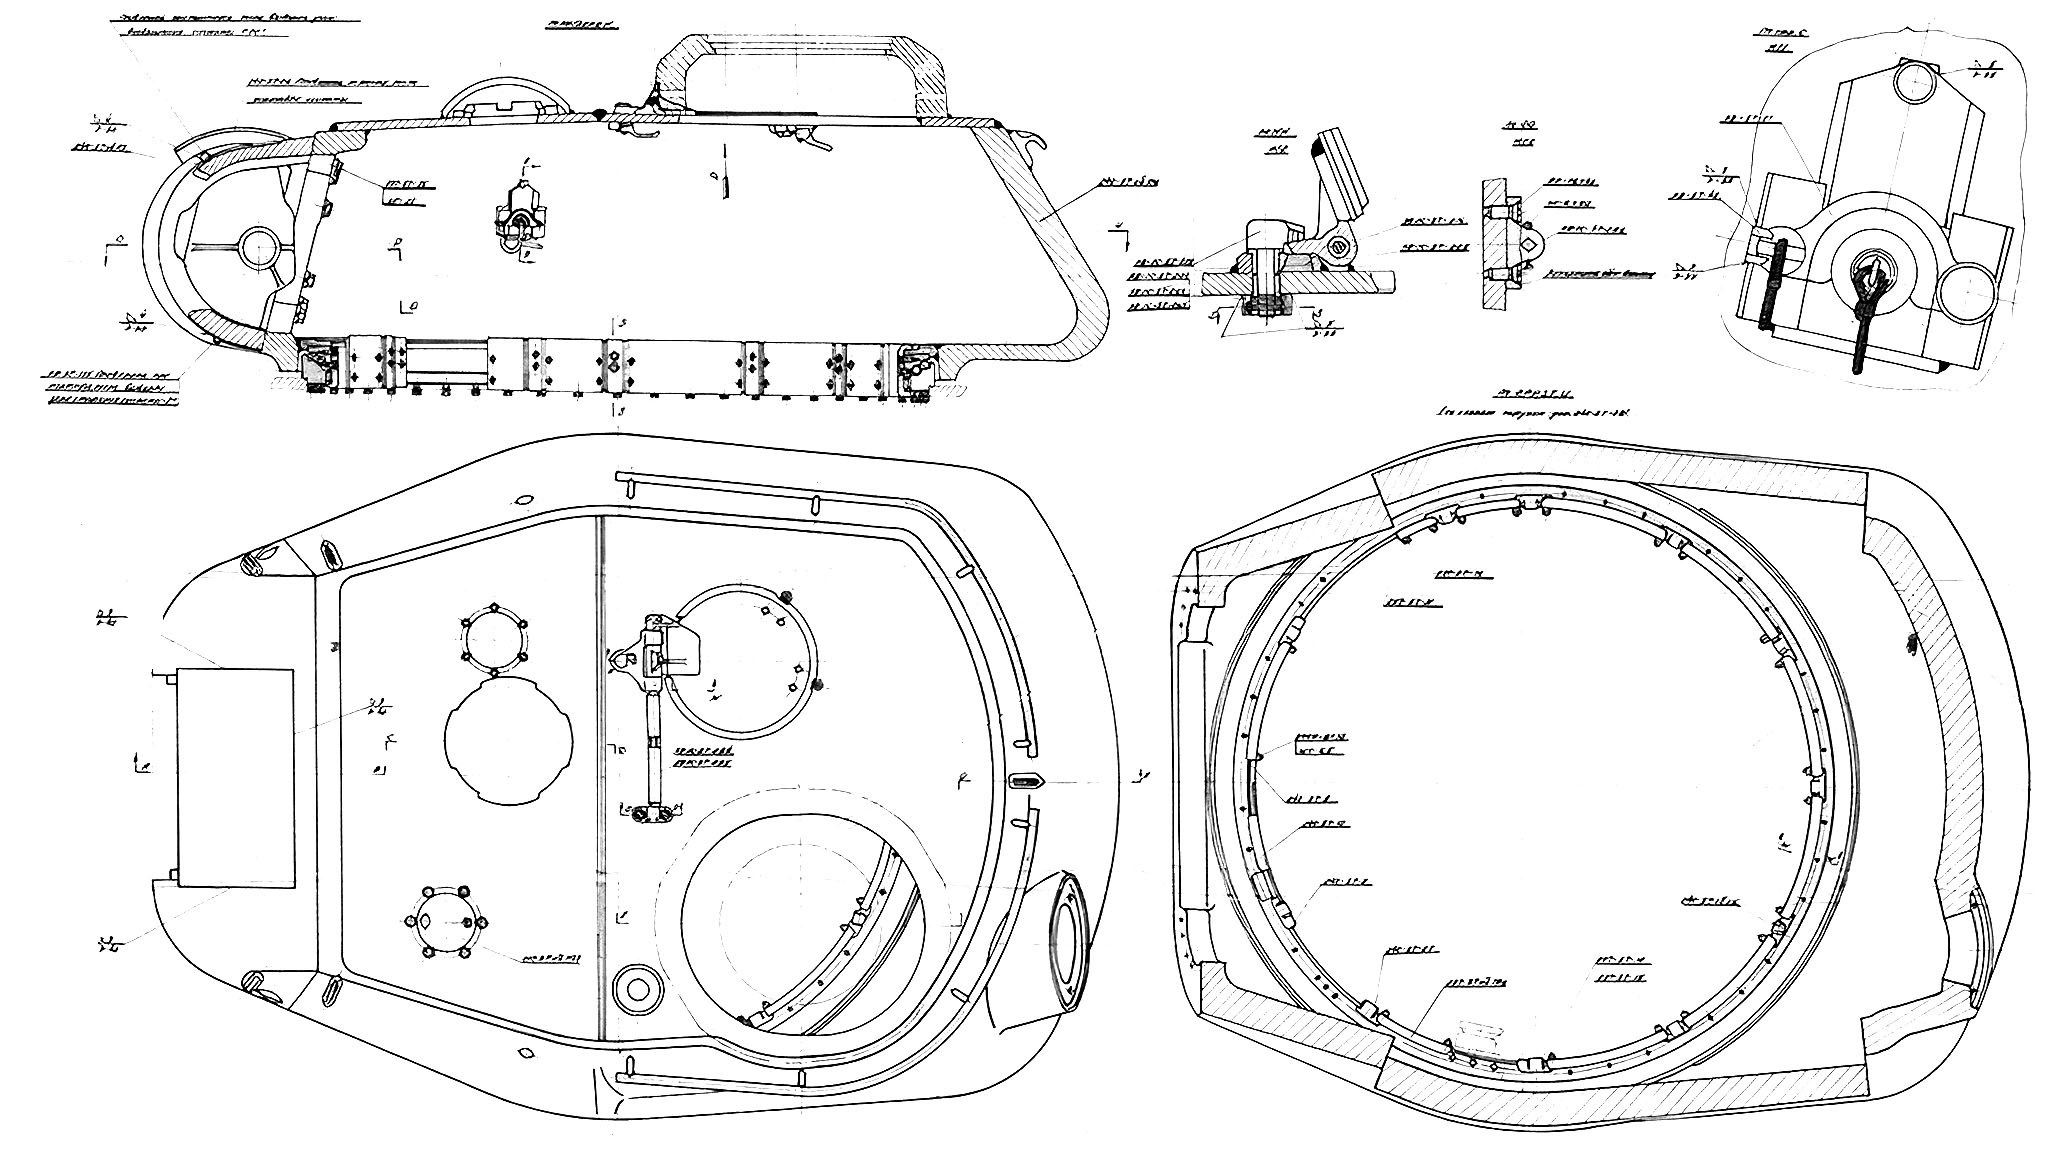 //www.military-references.com/wp-content/uploads/2023/12/is-2-tank-turret-blueprint-04.jpg